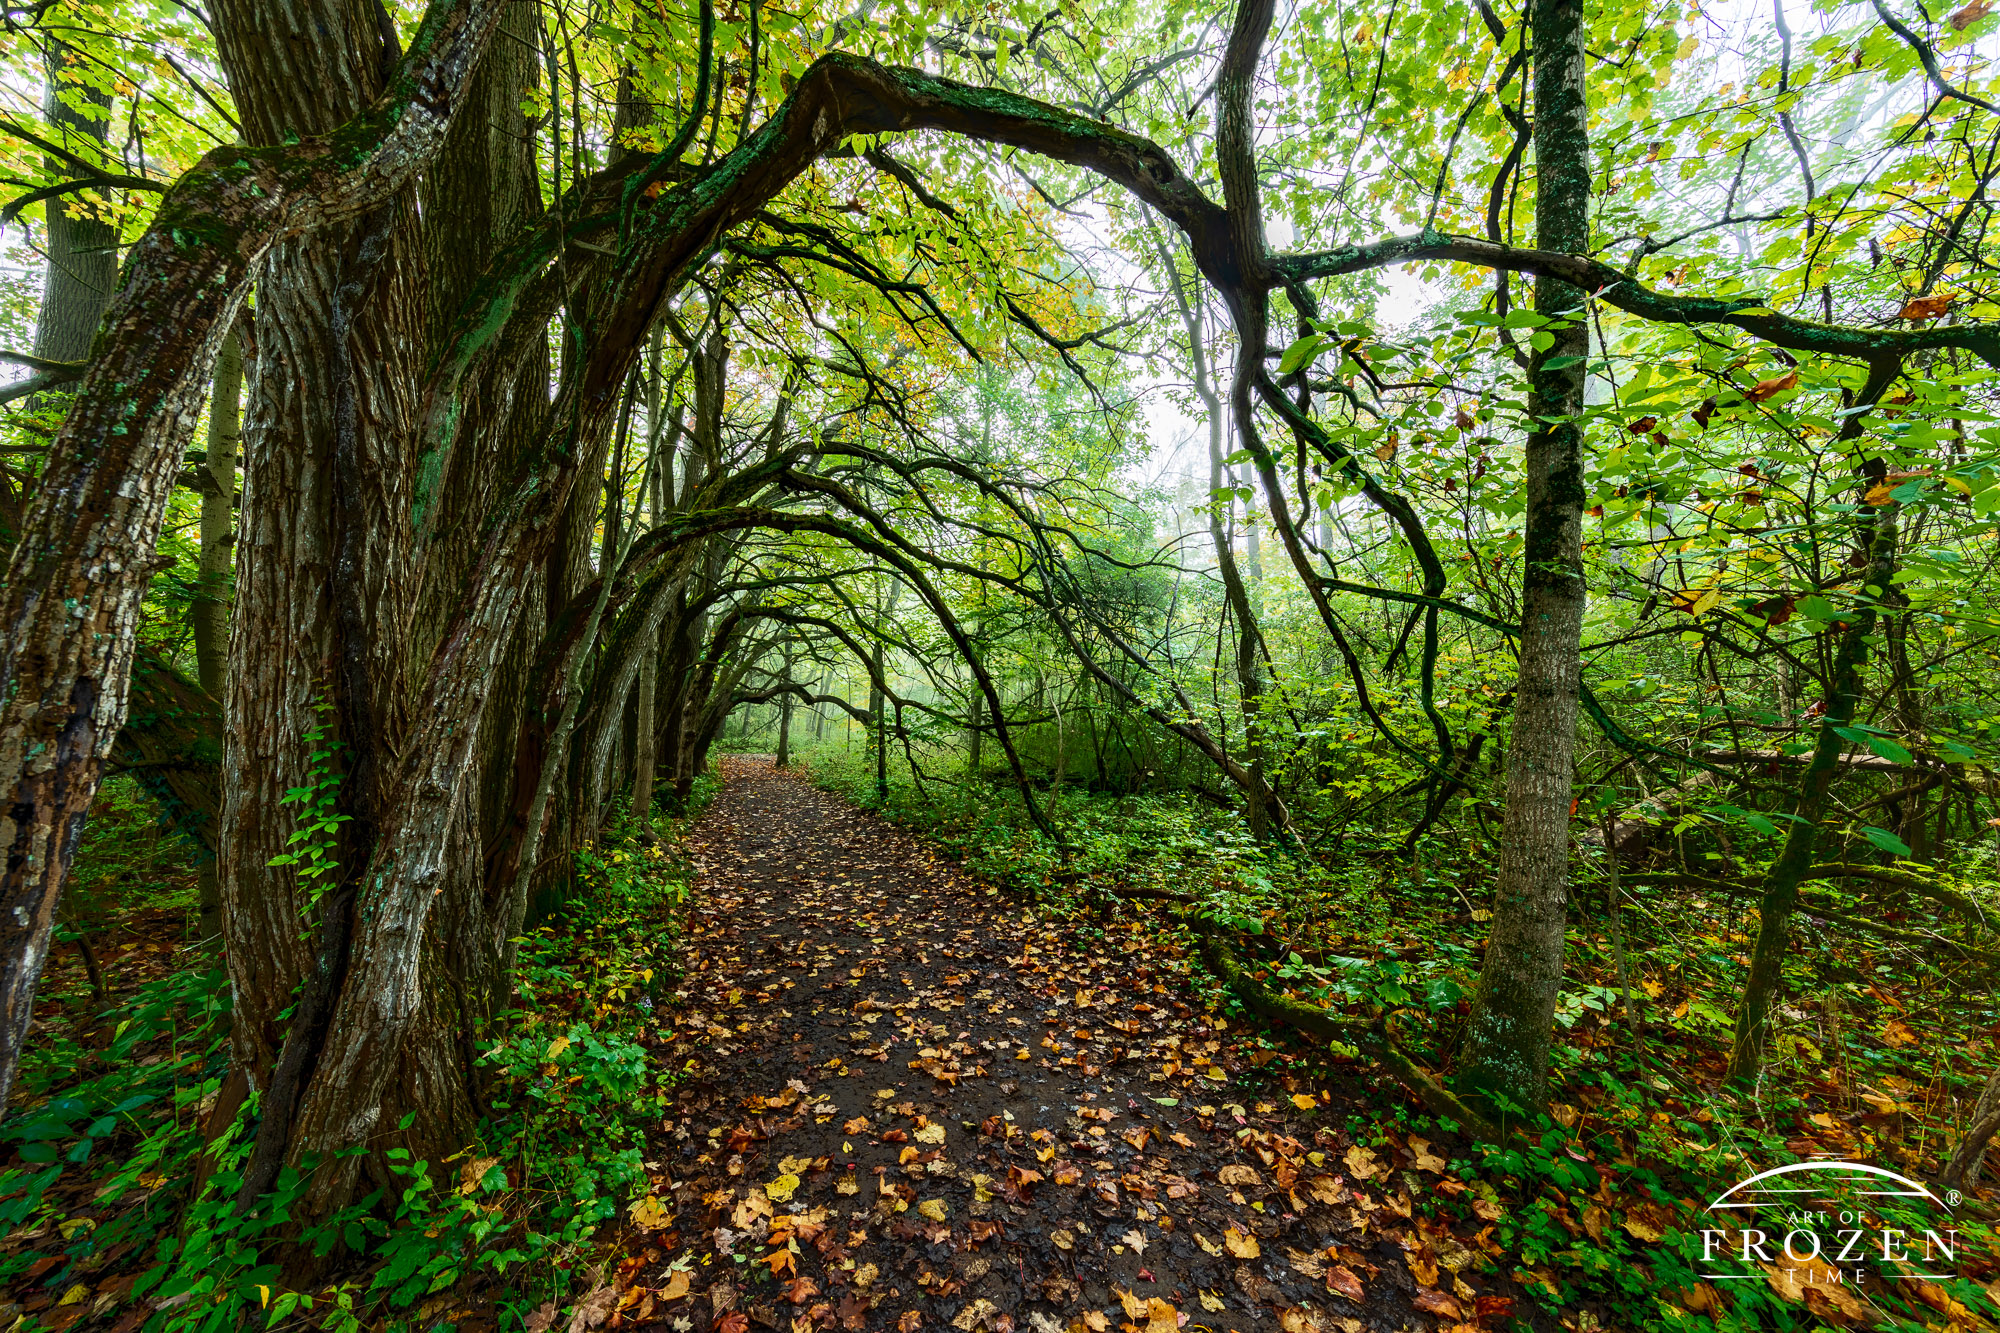 A foggy view of a living tunnel formed by Osage Orange trees that serves as a natural ancient fence line